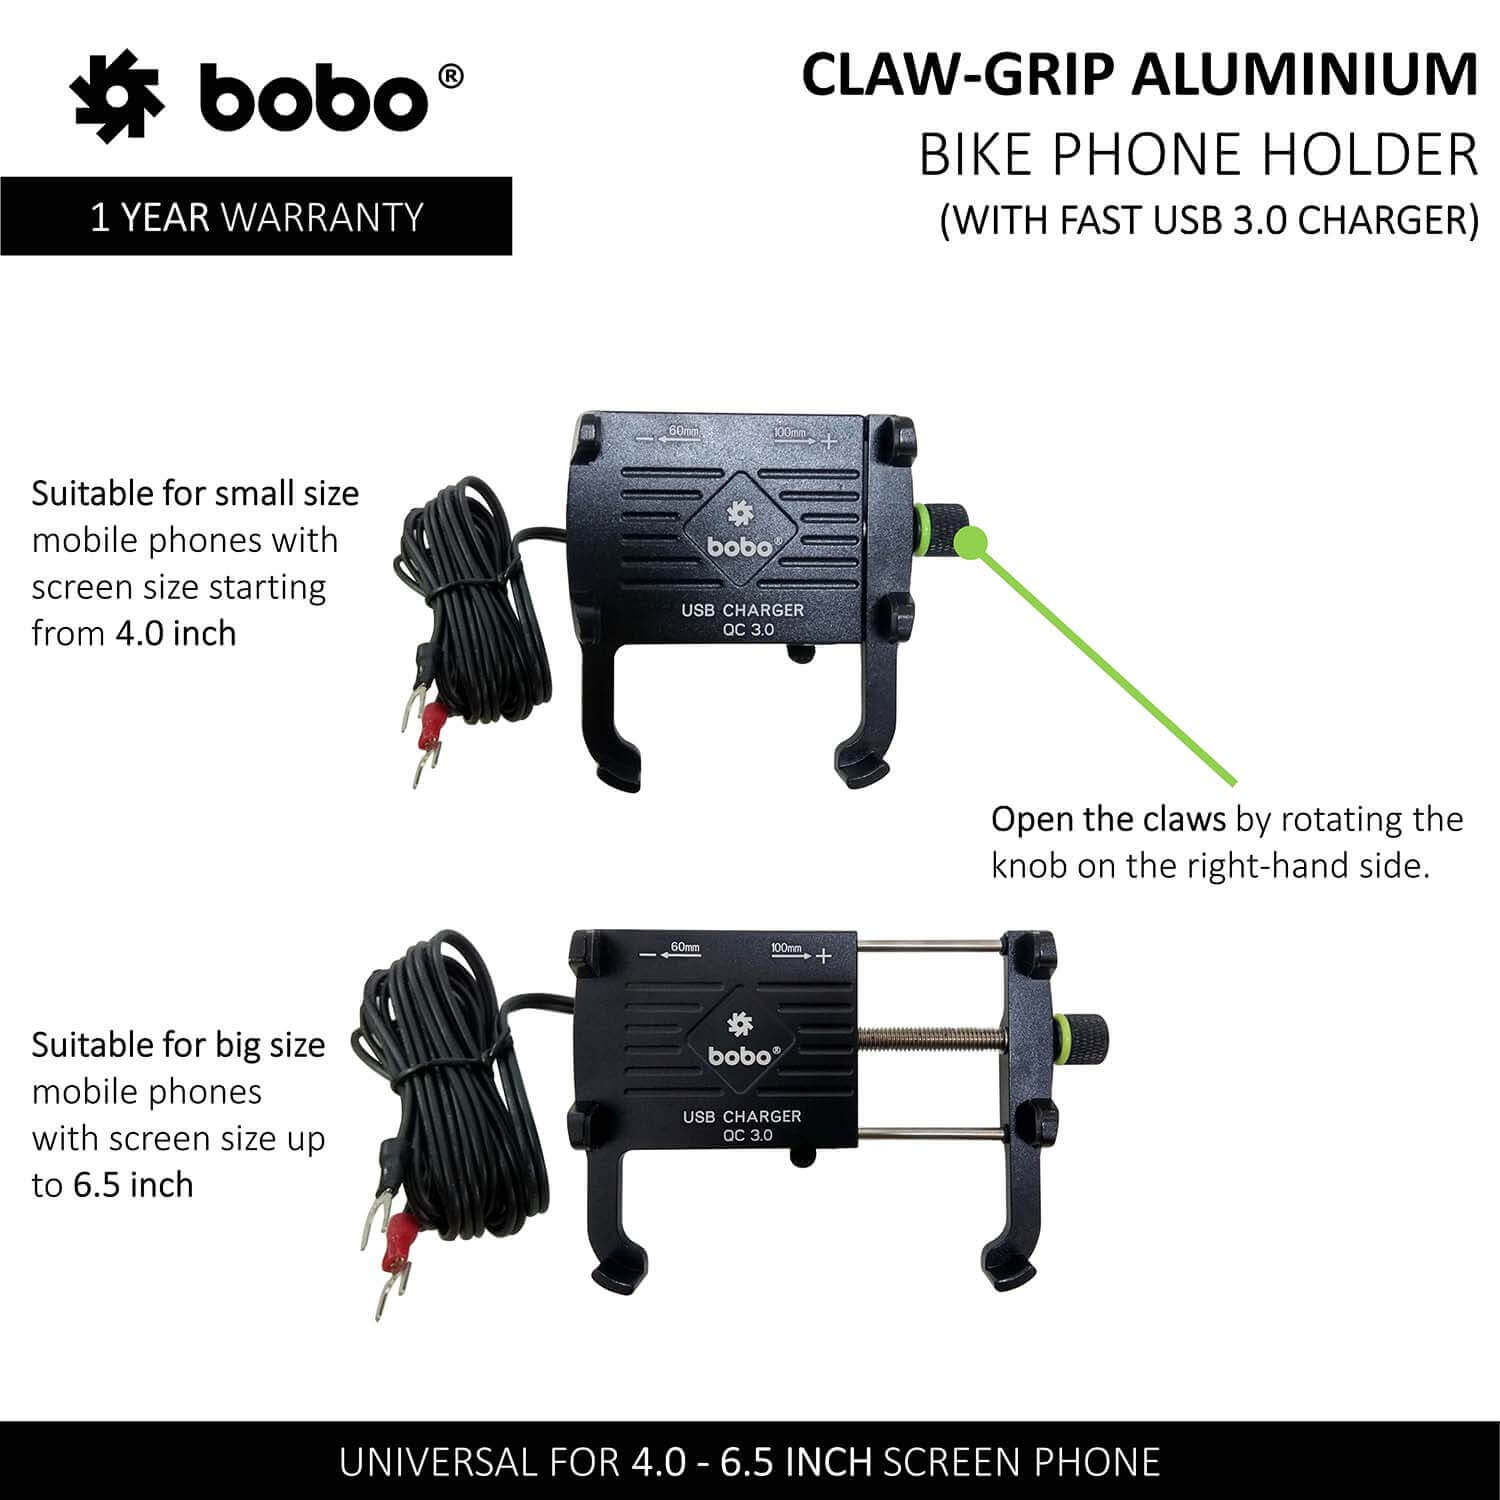 Claw-Grip Aluminium Bike Phone Holder (With Fast USB 3.0 Charger) Motorcycle Mobile Mount - LRL Motors